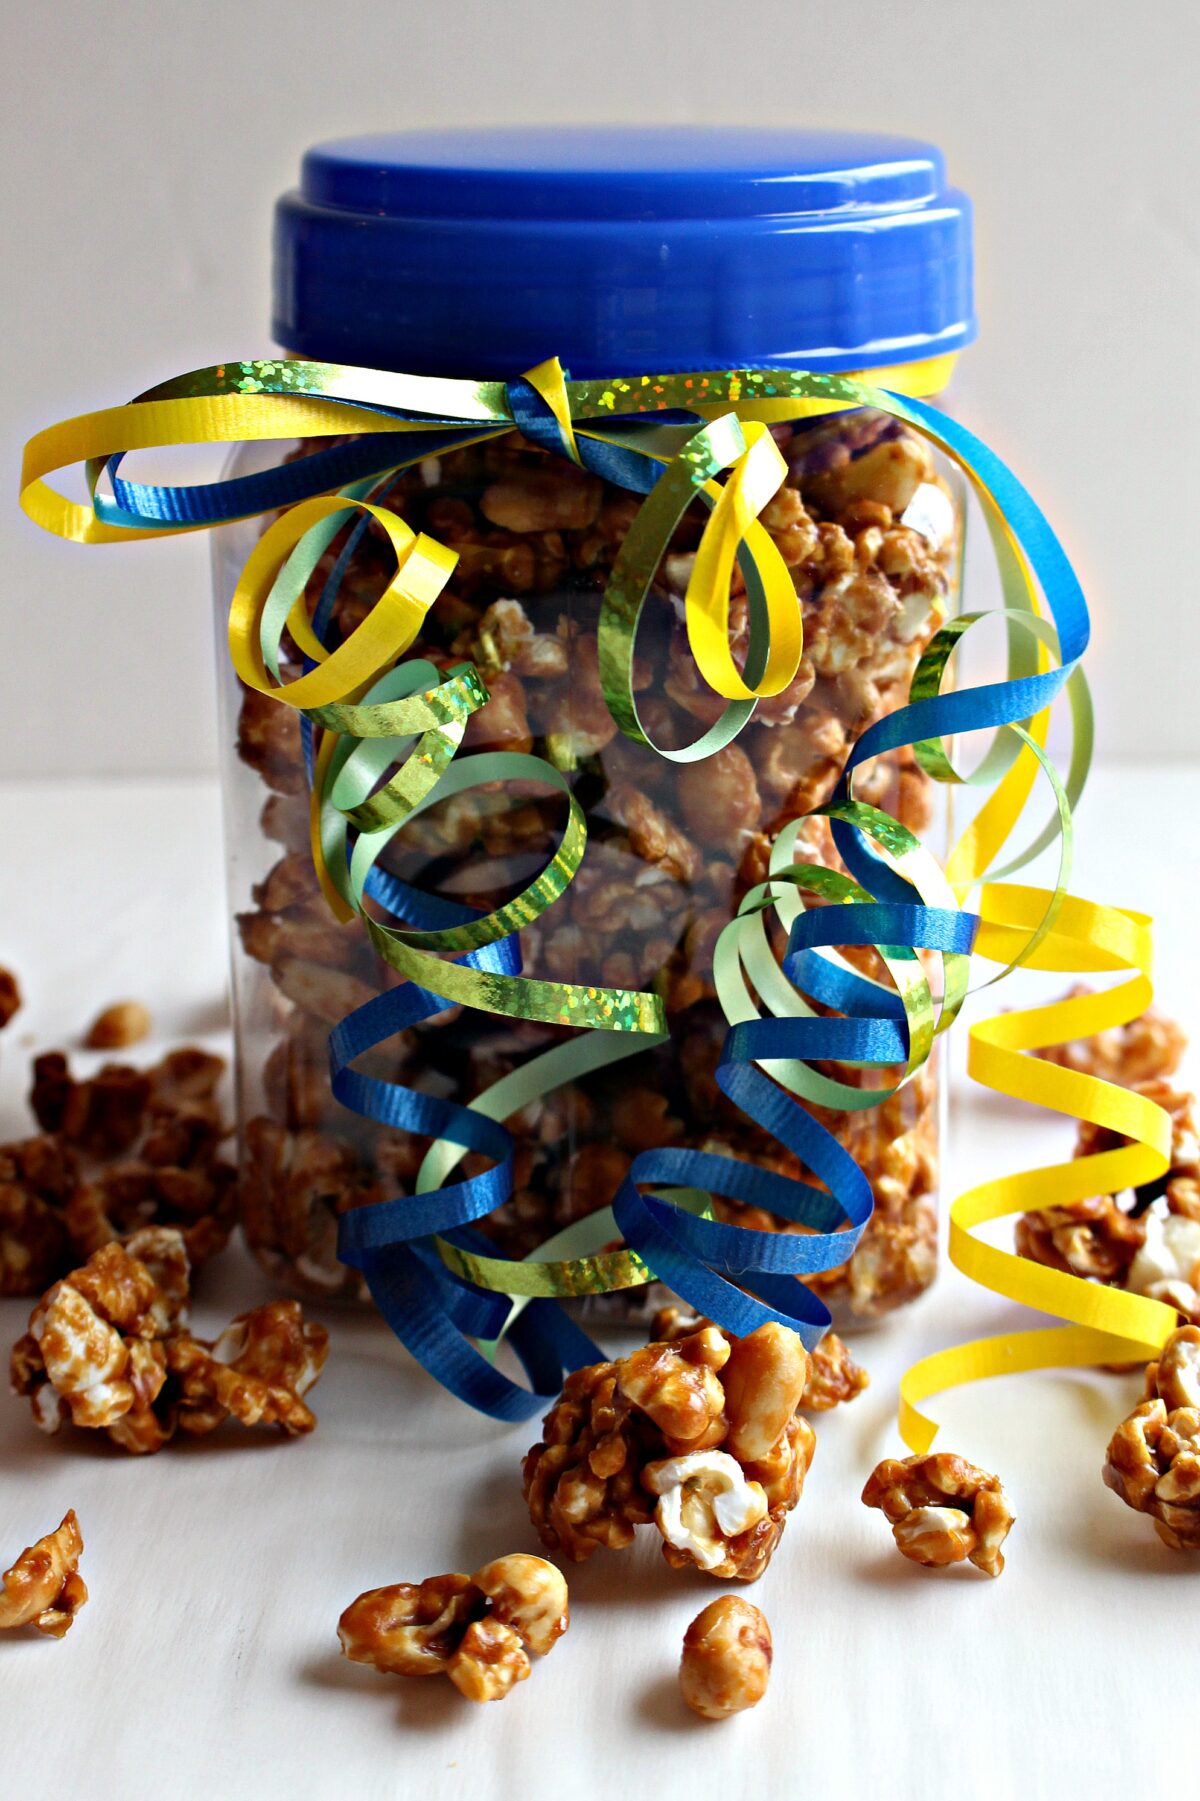 Gift in a clear jar with a blue lid and gold and blue ribbons.